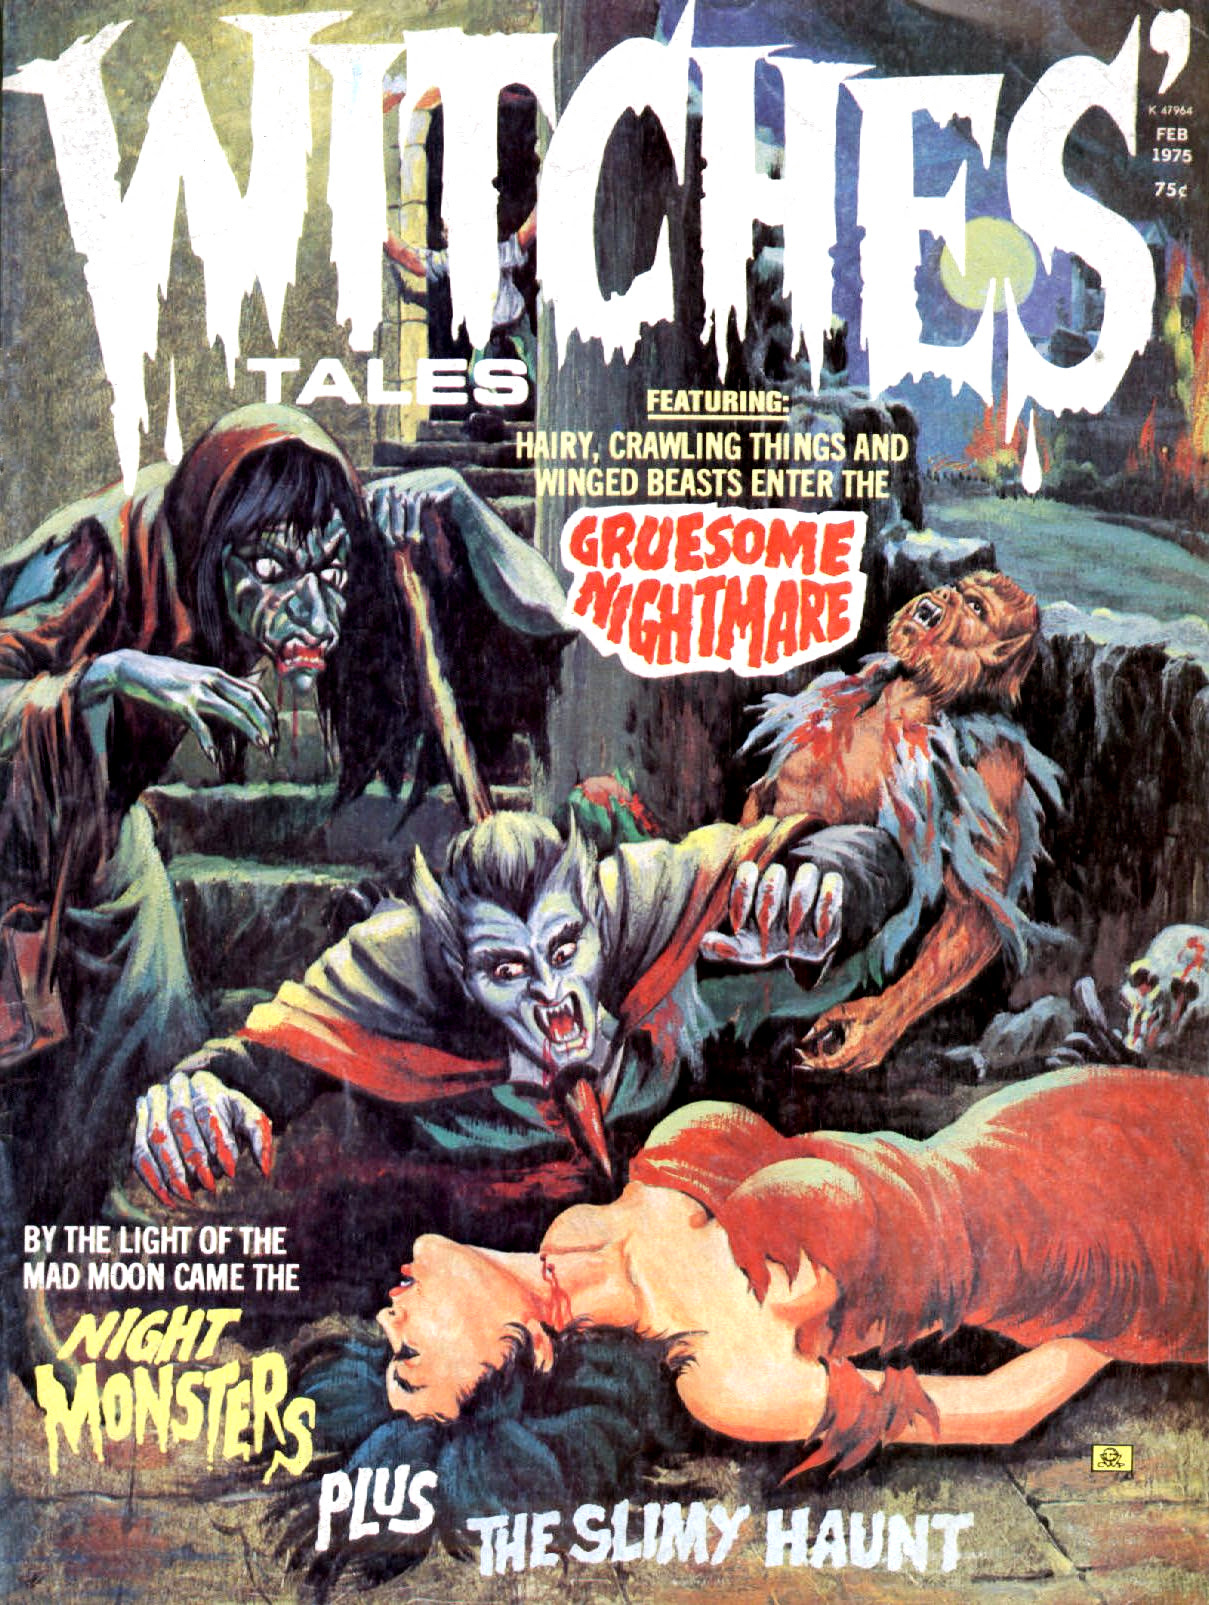 Witches' Tales Vol. 7 #1 (Eerie Publications 1975)